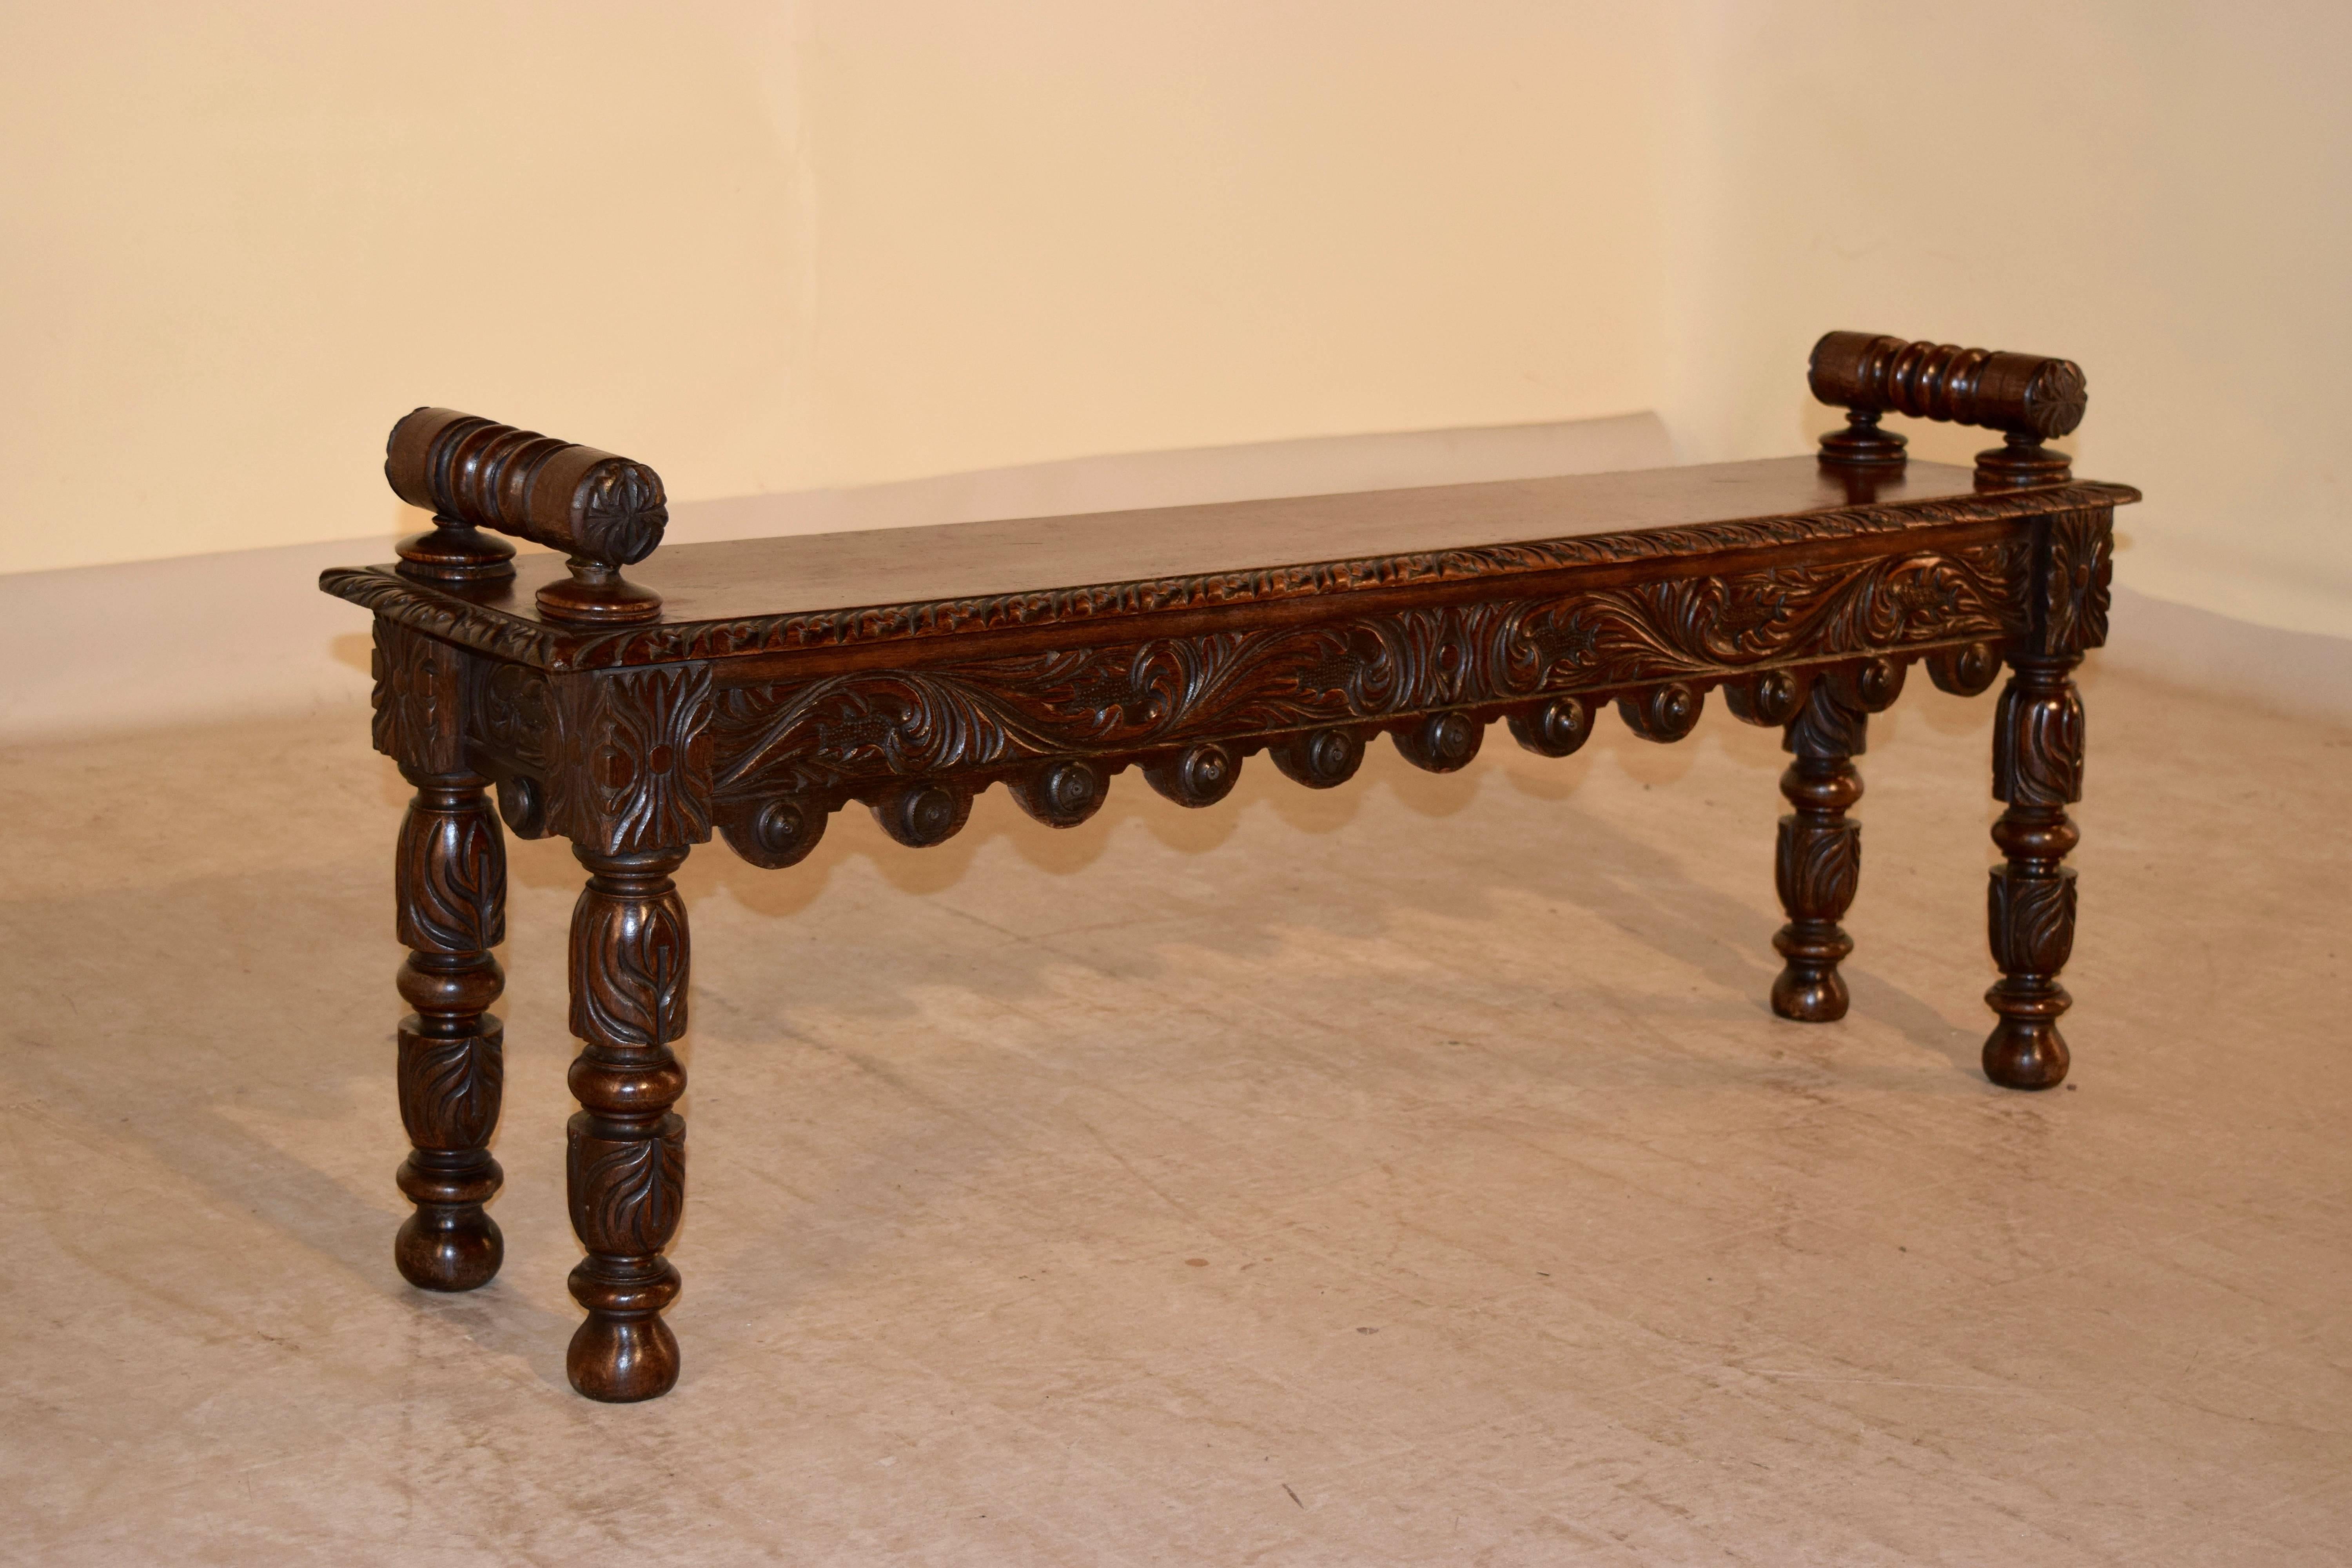 19th century English oak window seat with hand-turned handles attached to the seat, which has a beveled and gadrooned edge. The apron is also carved decorated and has a scalloped edge on the front. The piece is supported on hand carved legs.